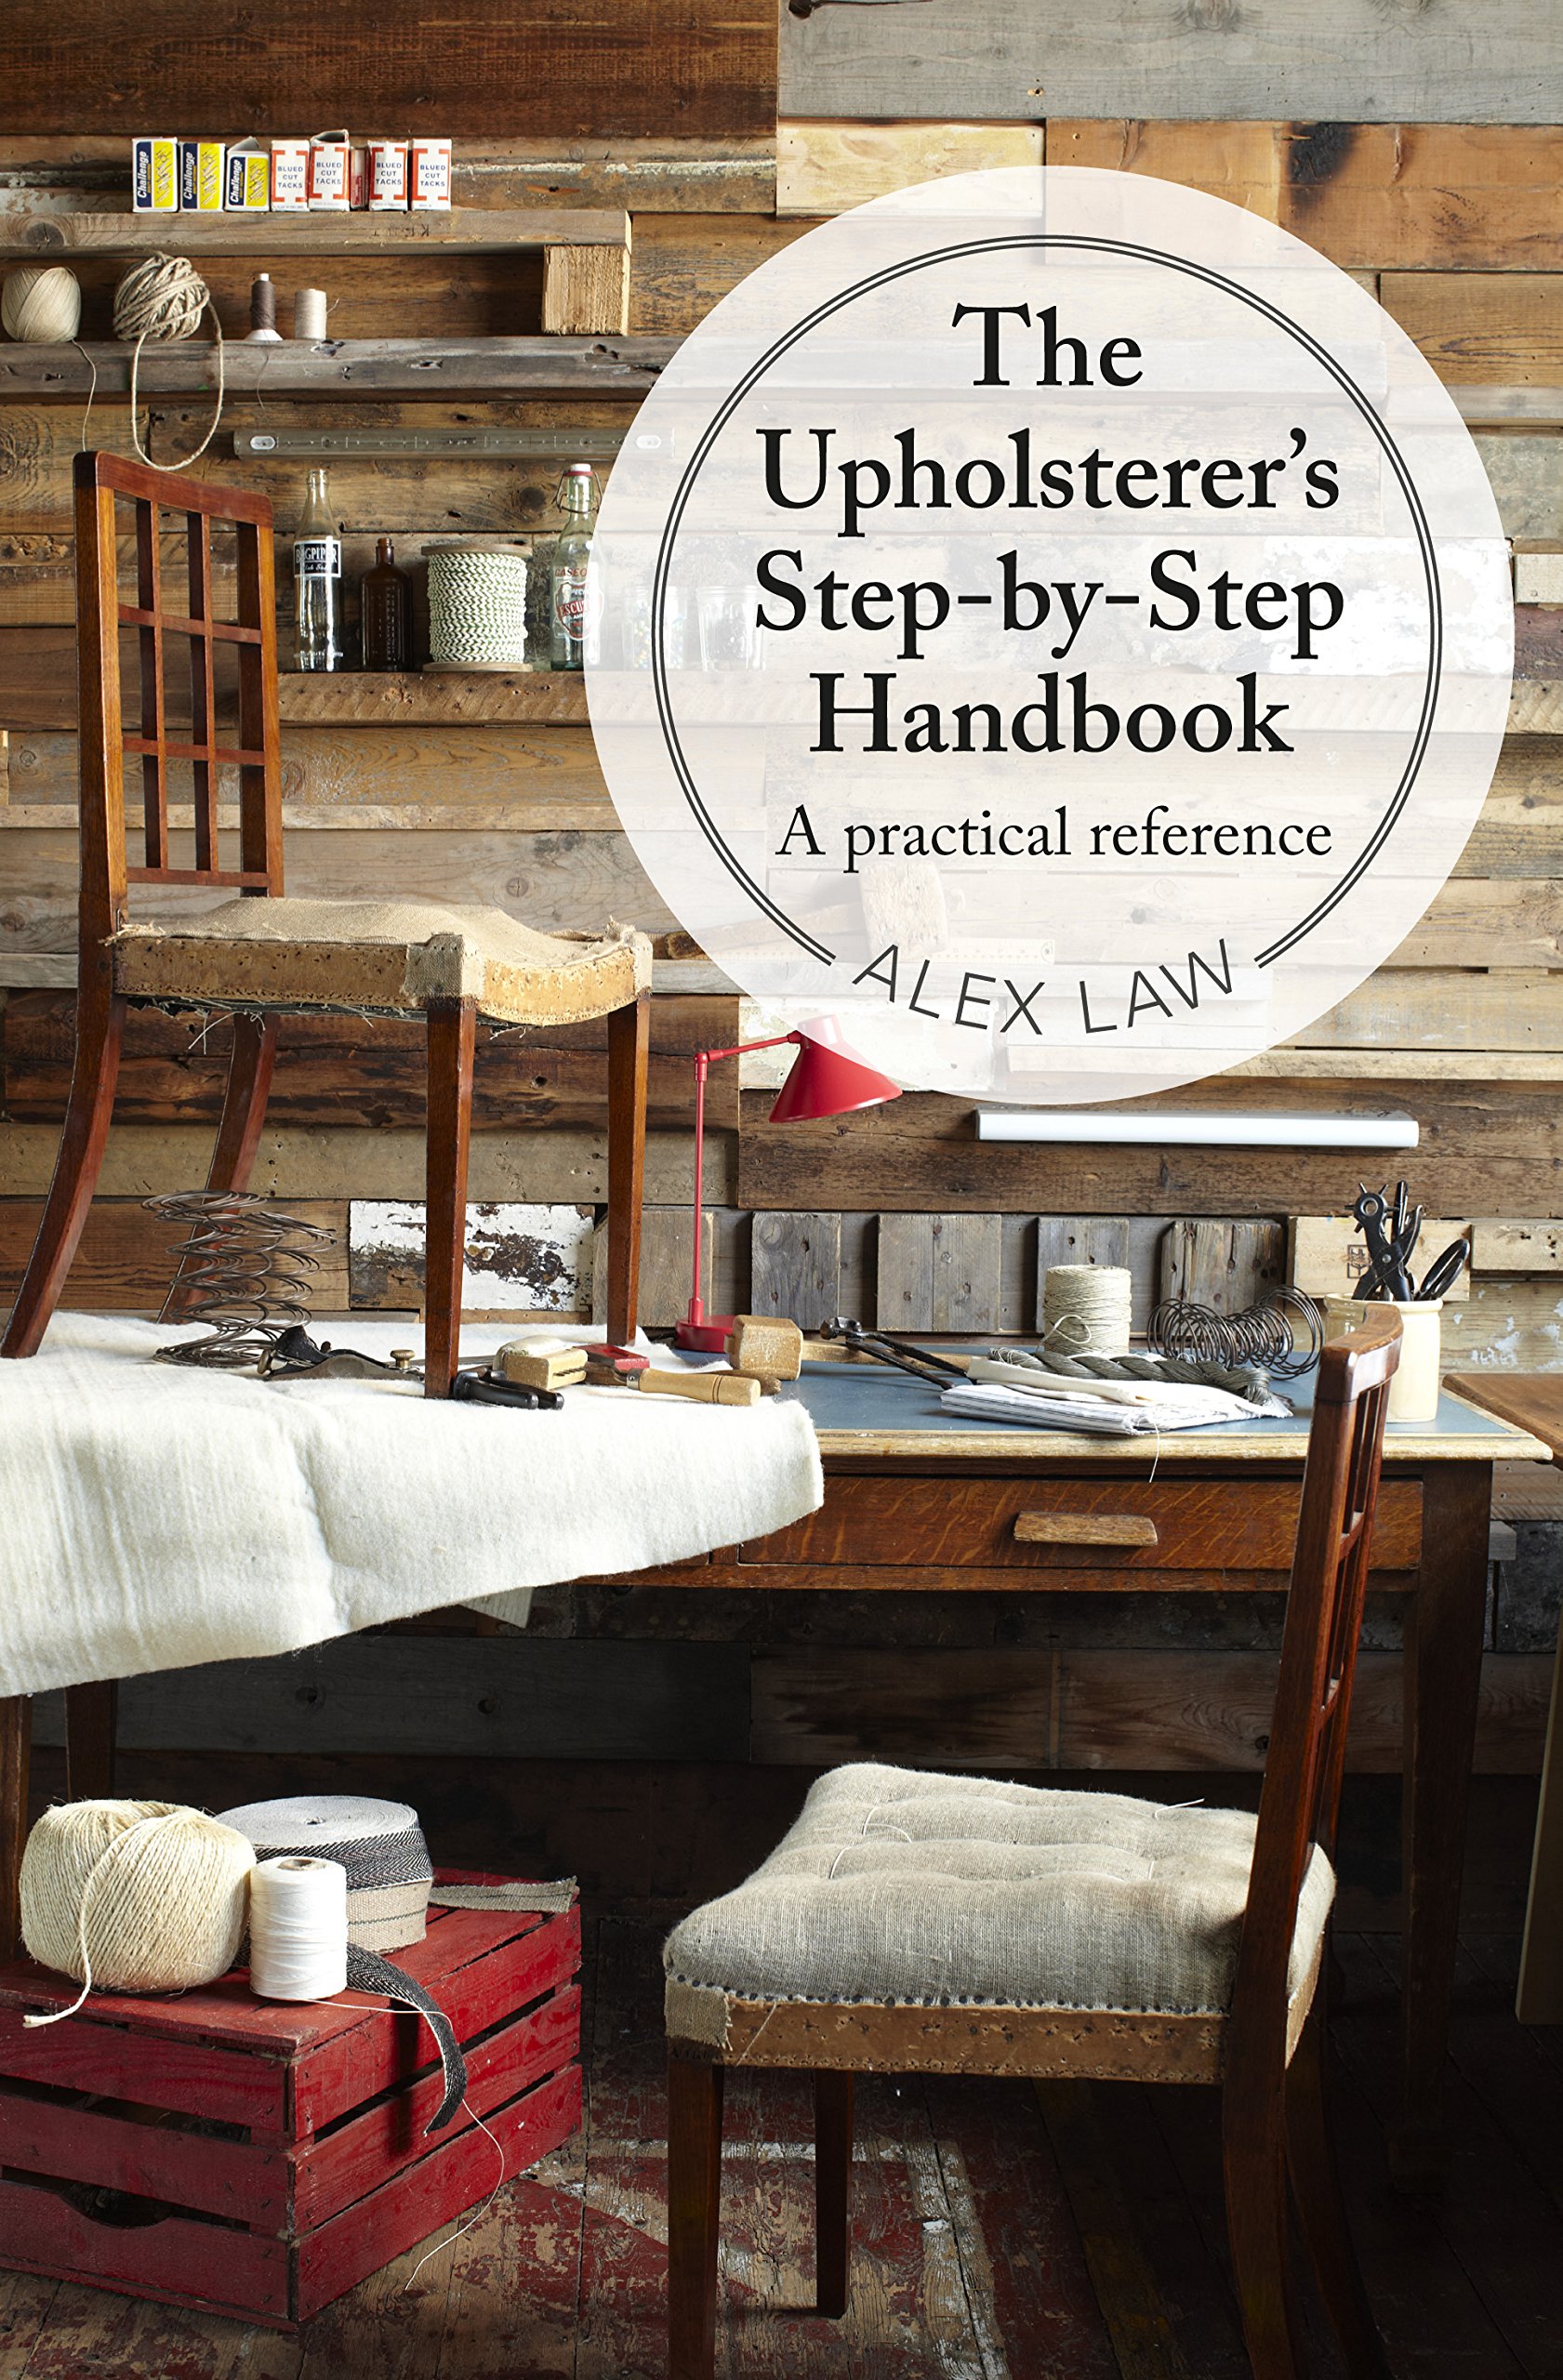 I bought that book. Upholsterer. Step book. Step by Step book. Step by Step book Kathryn l. Schwartz.